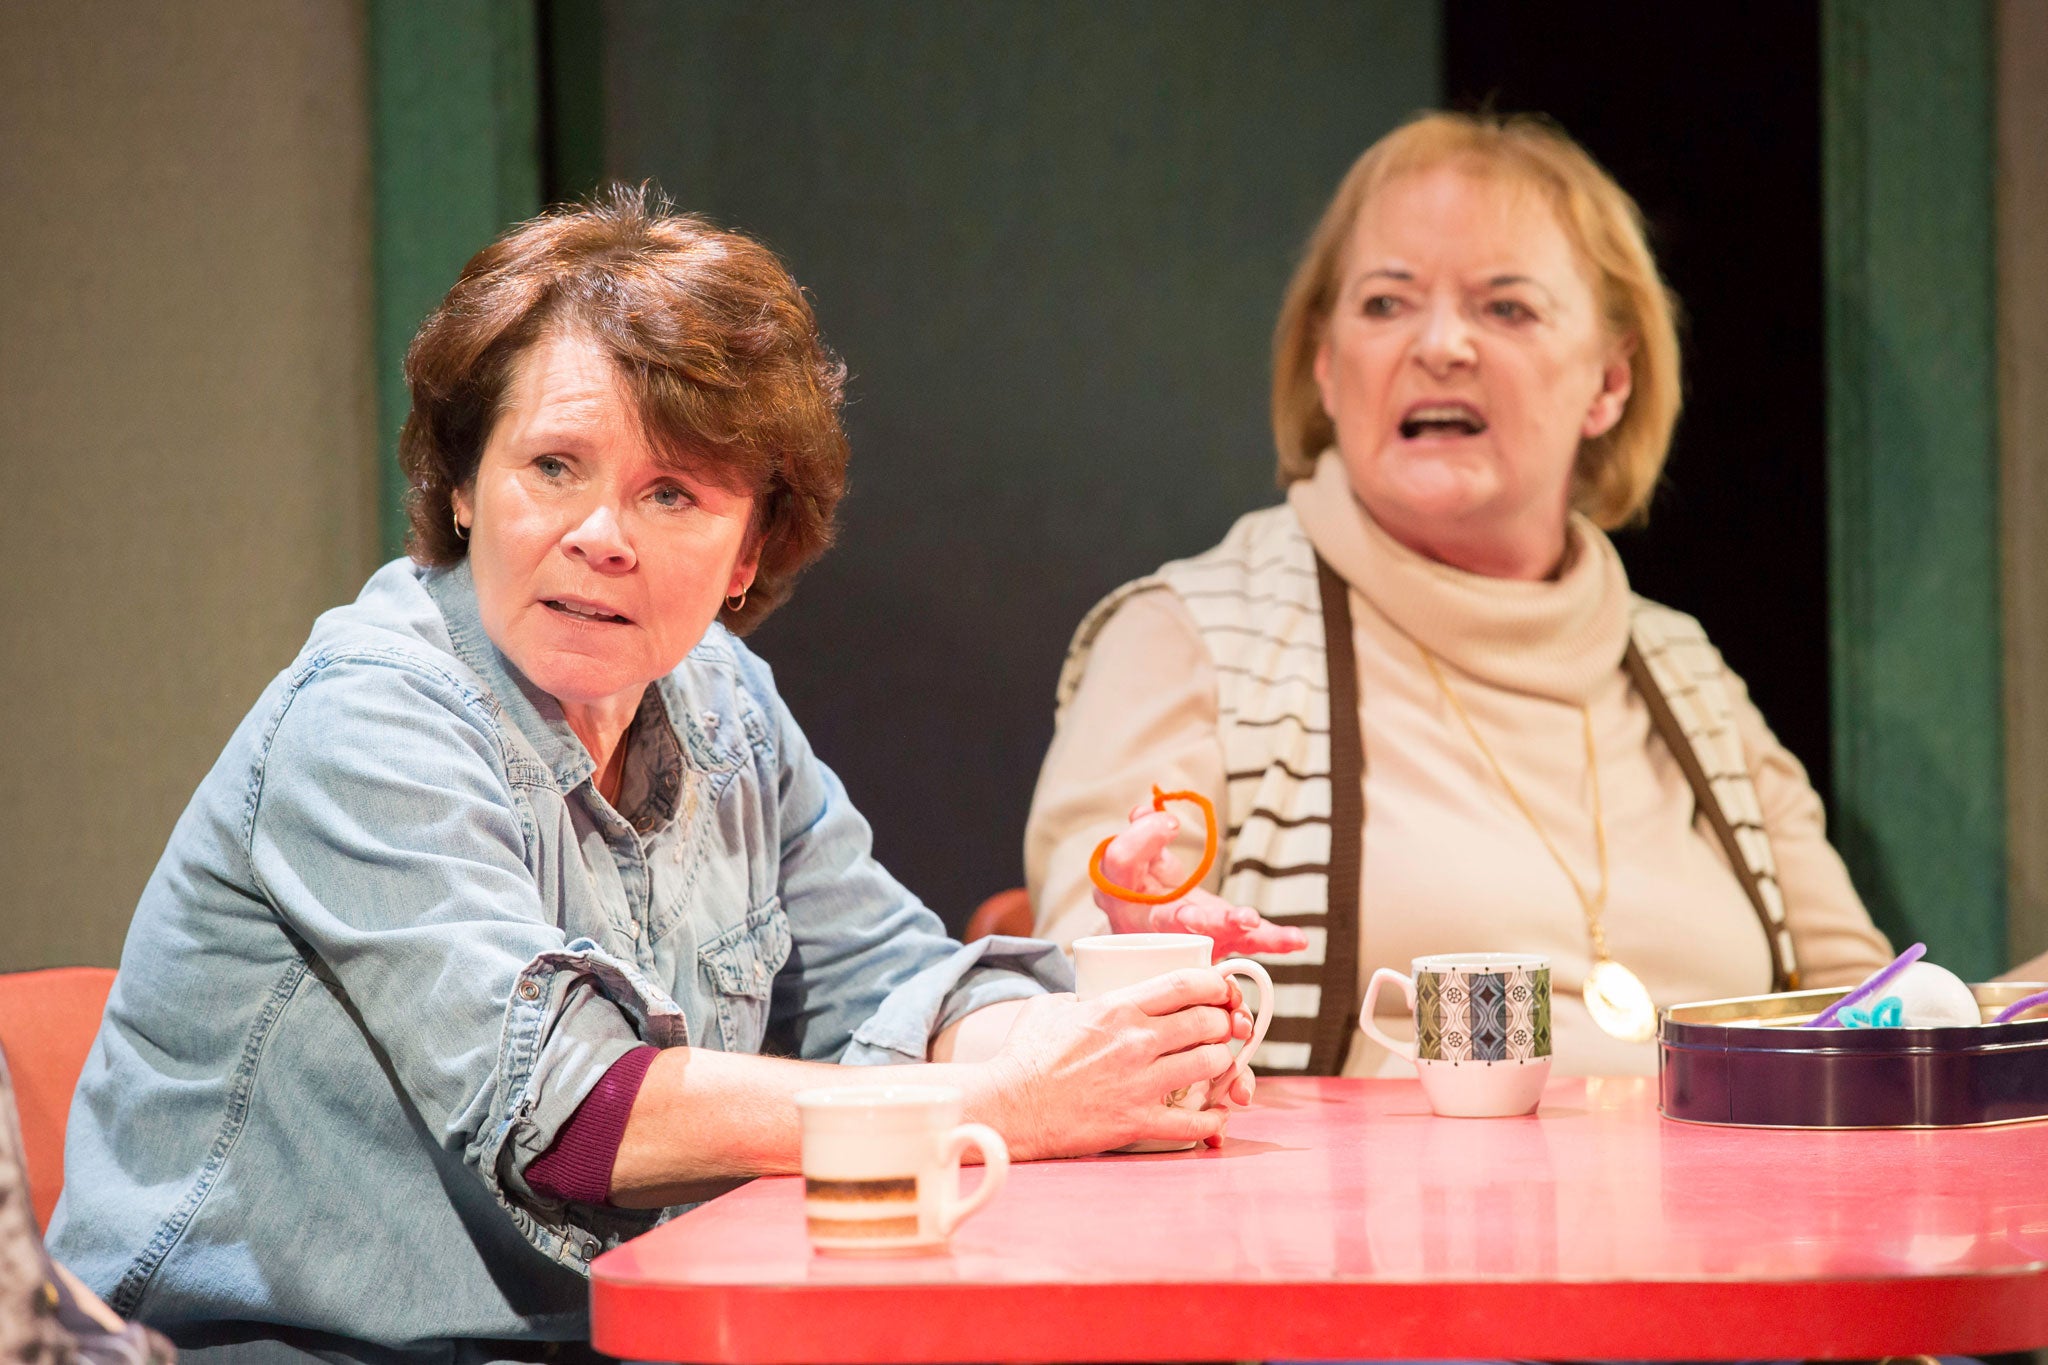 Good People, theatre review: Imelda Staunton magnificent as tough single mother2048 x 1365